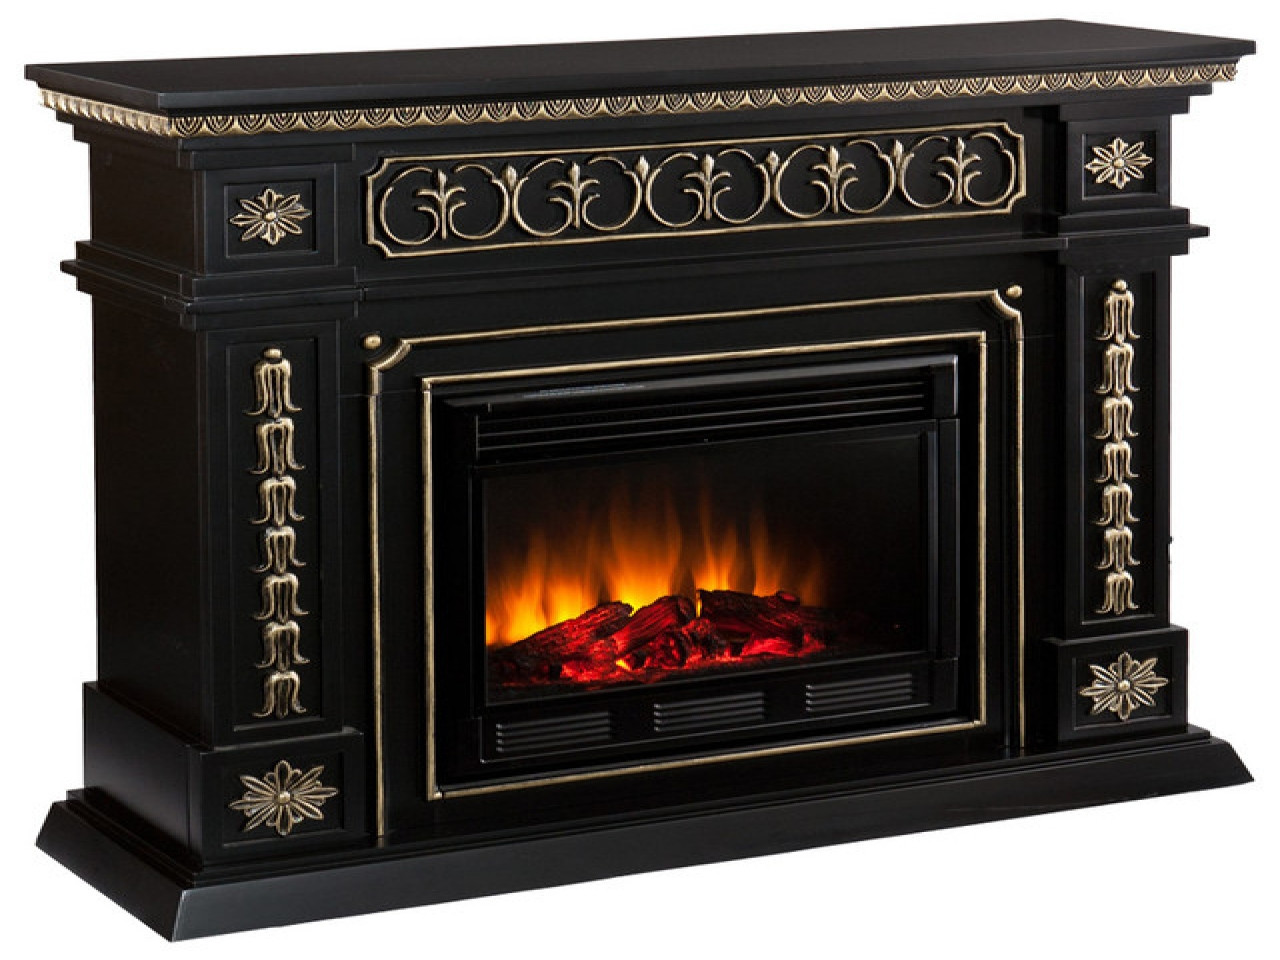 Stone Look Electric Fireplace
 Electric fireplace bookshelf black electric fireplace